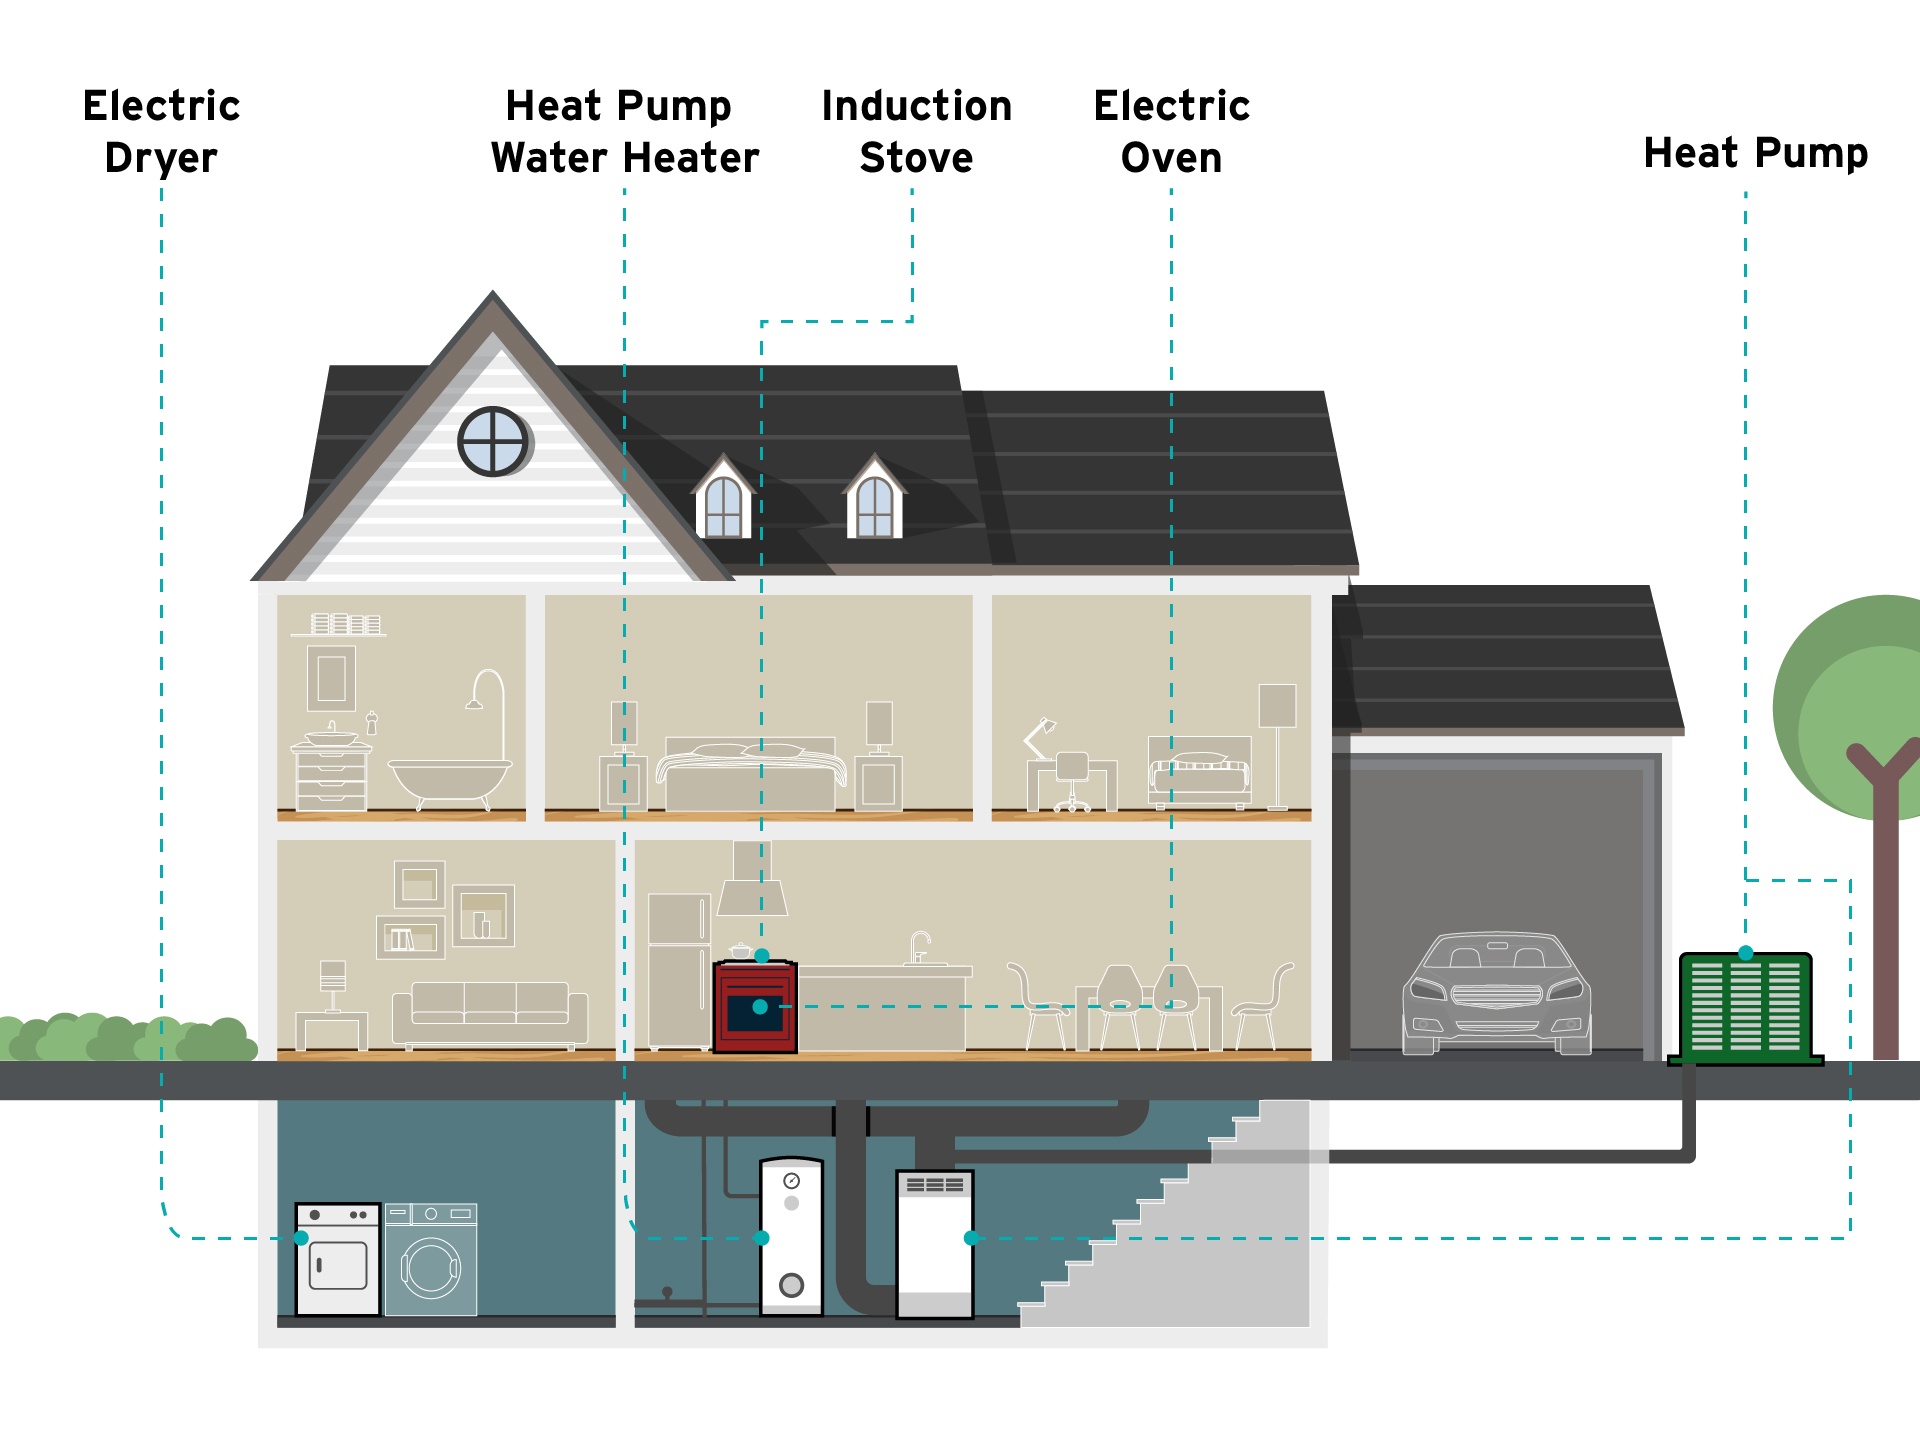 Analysis of Greenhouse Gas Emissions from Residential Heating